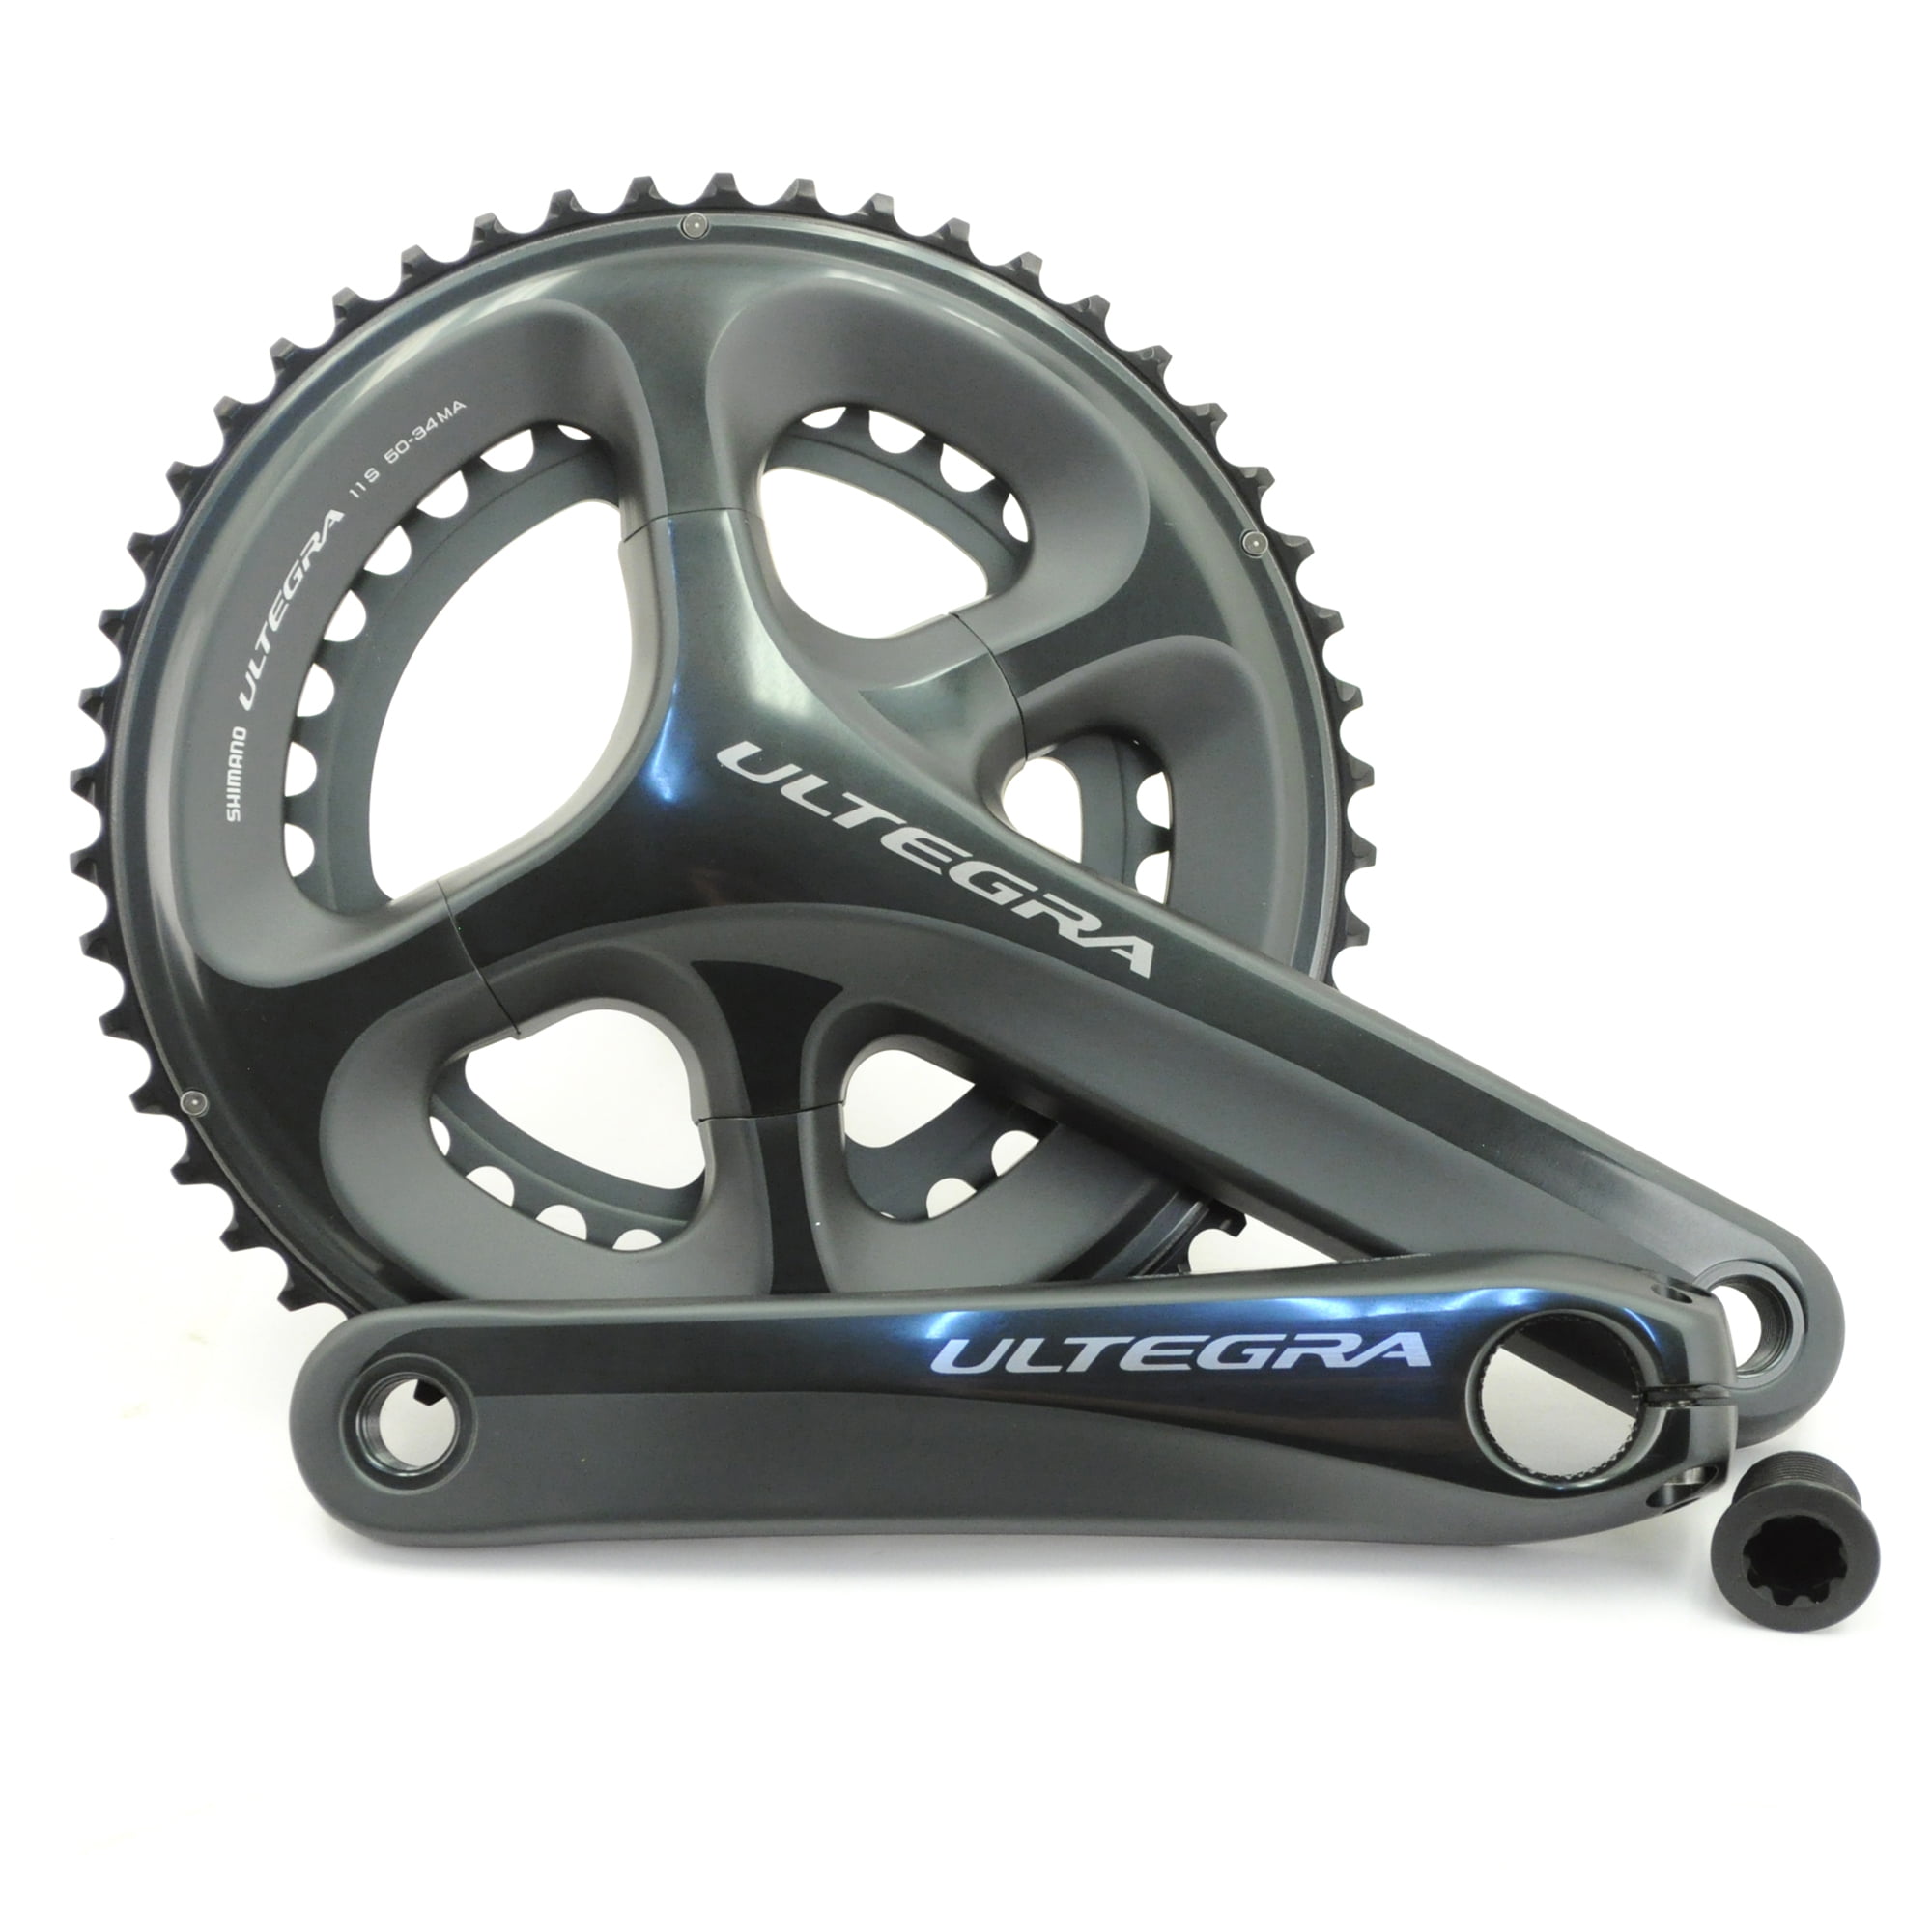 11 speed Shimano Ultegra FC-6800 Chainring 50T for 50-34T 